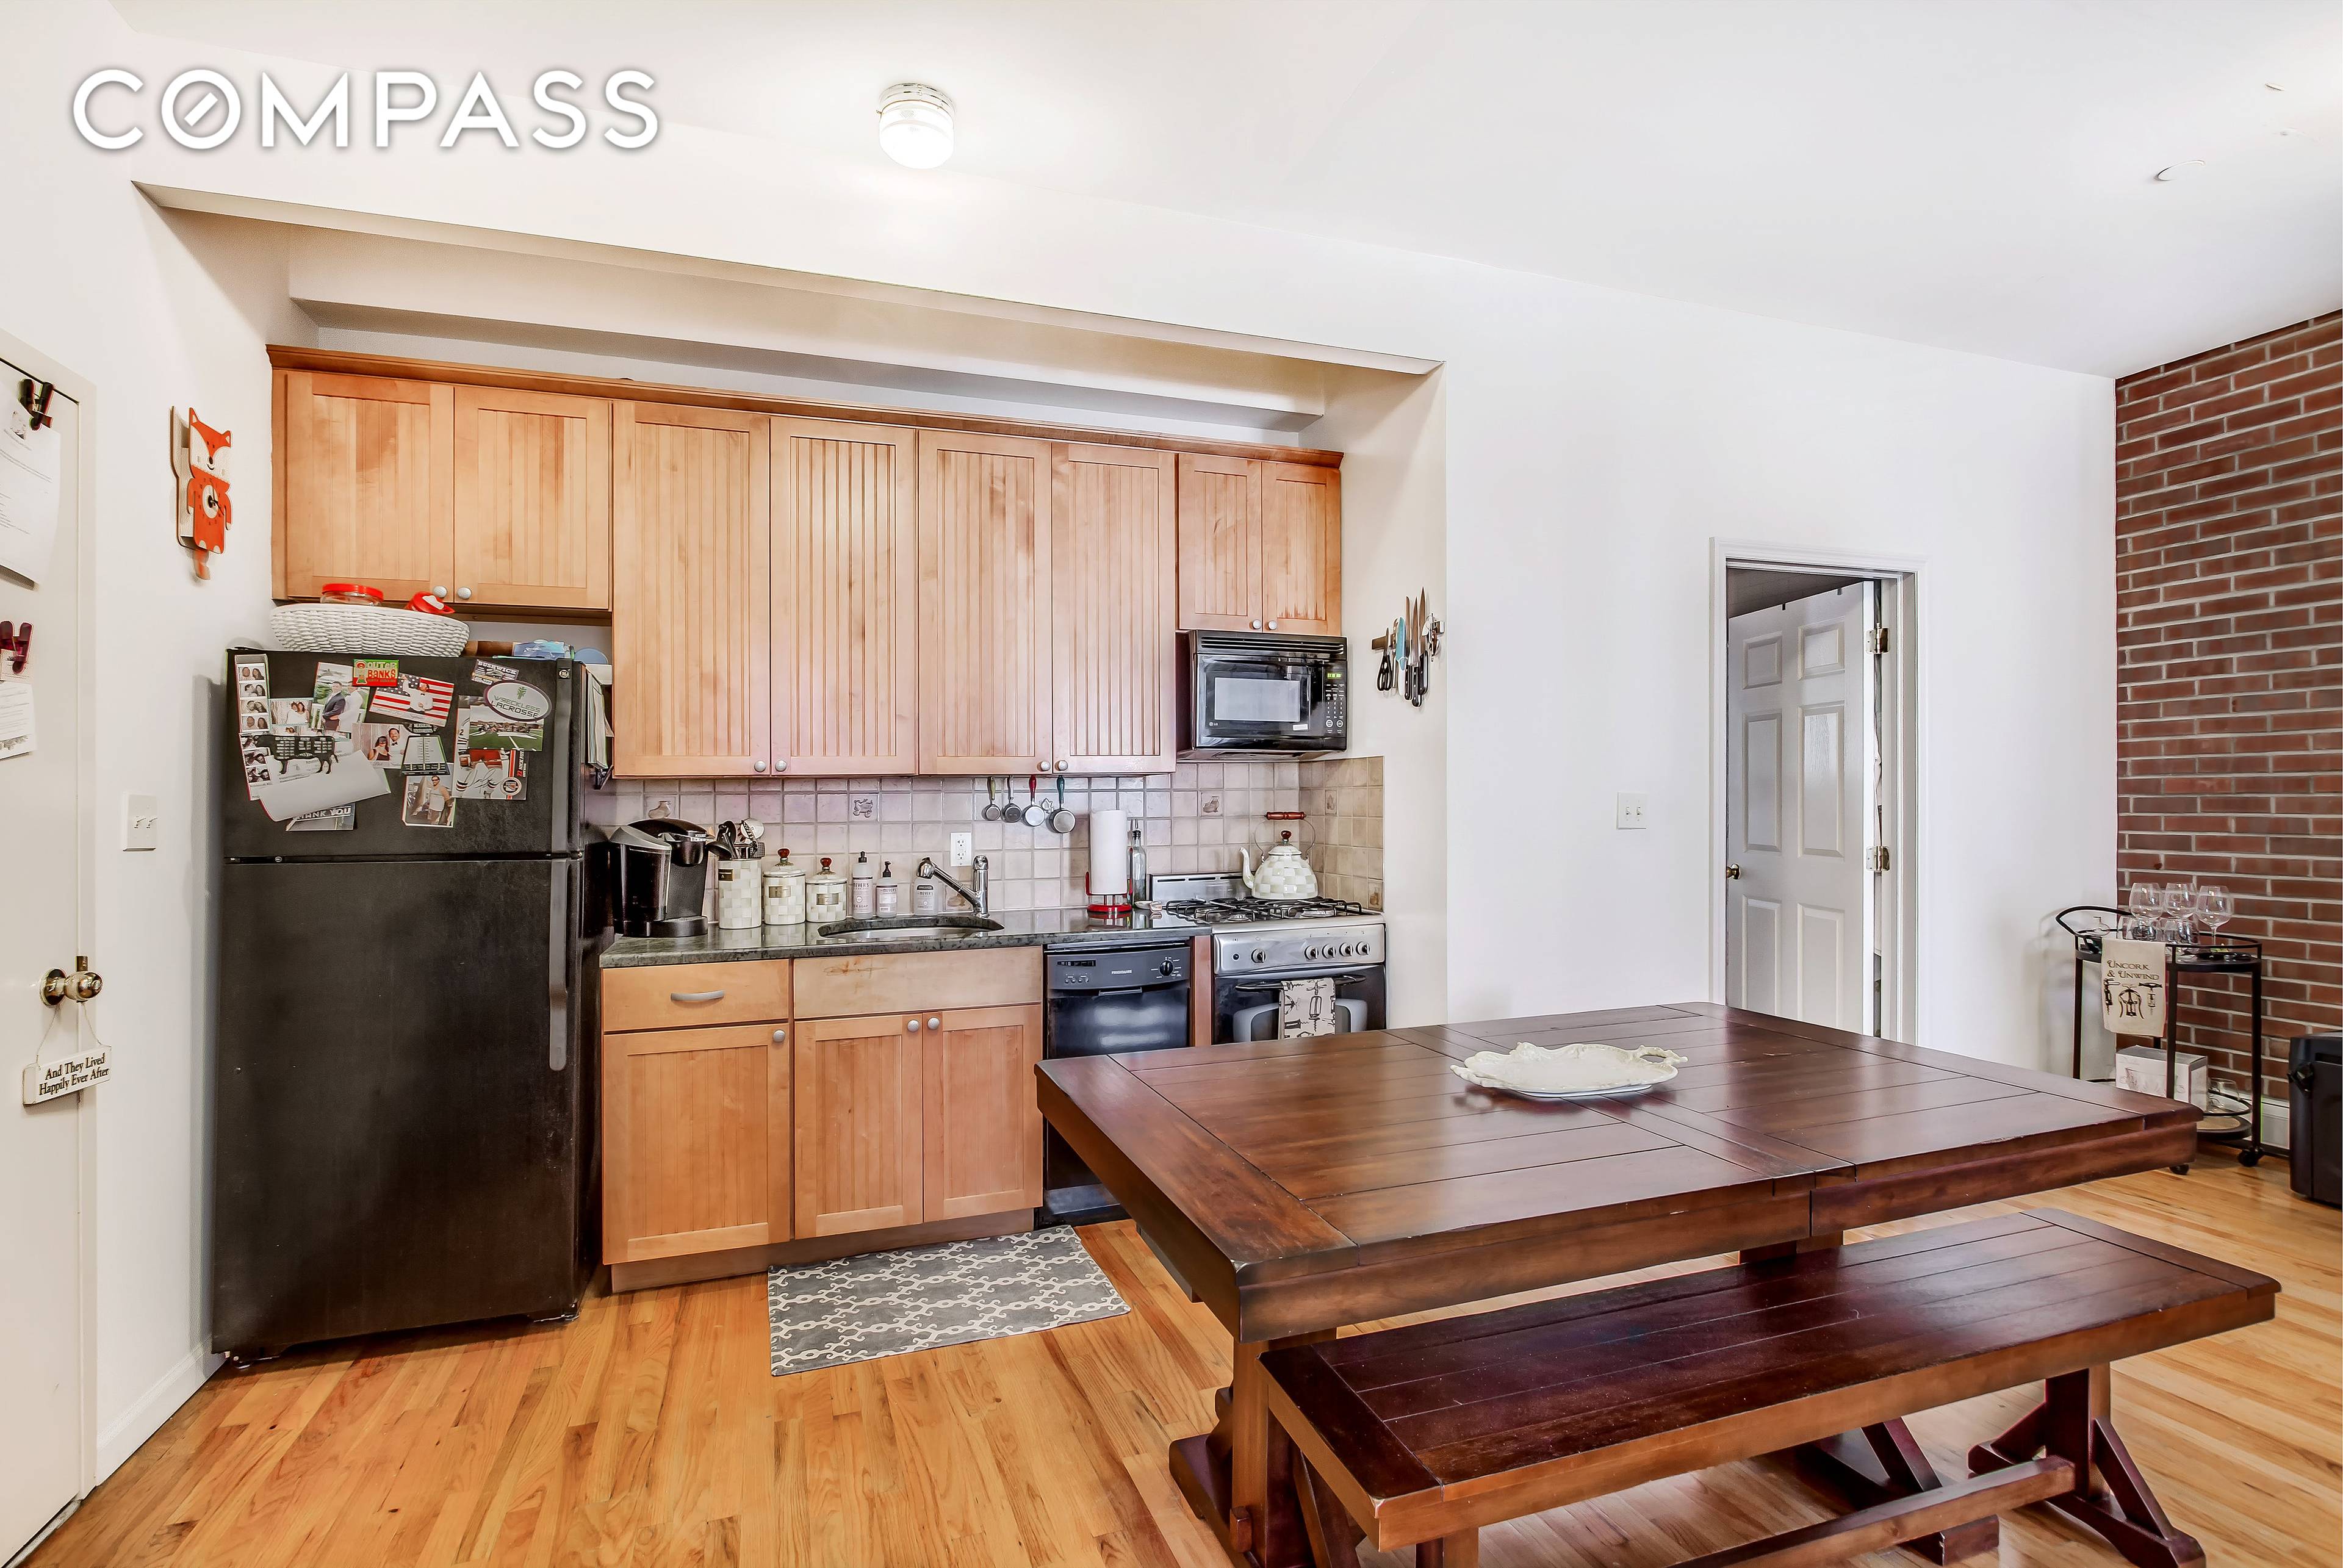 Williamsburg Spacious 2BD 1BA with Tall Ceilings, Exposed Brick, Open Kitchen with M W, D W, and Washer Dryer In Unit This fully modernized home consists of a spacious layout ...